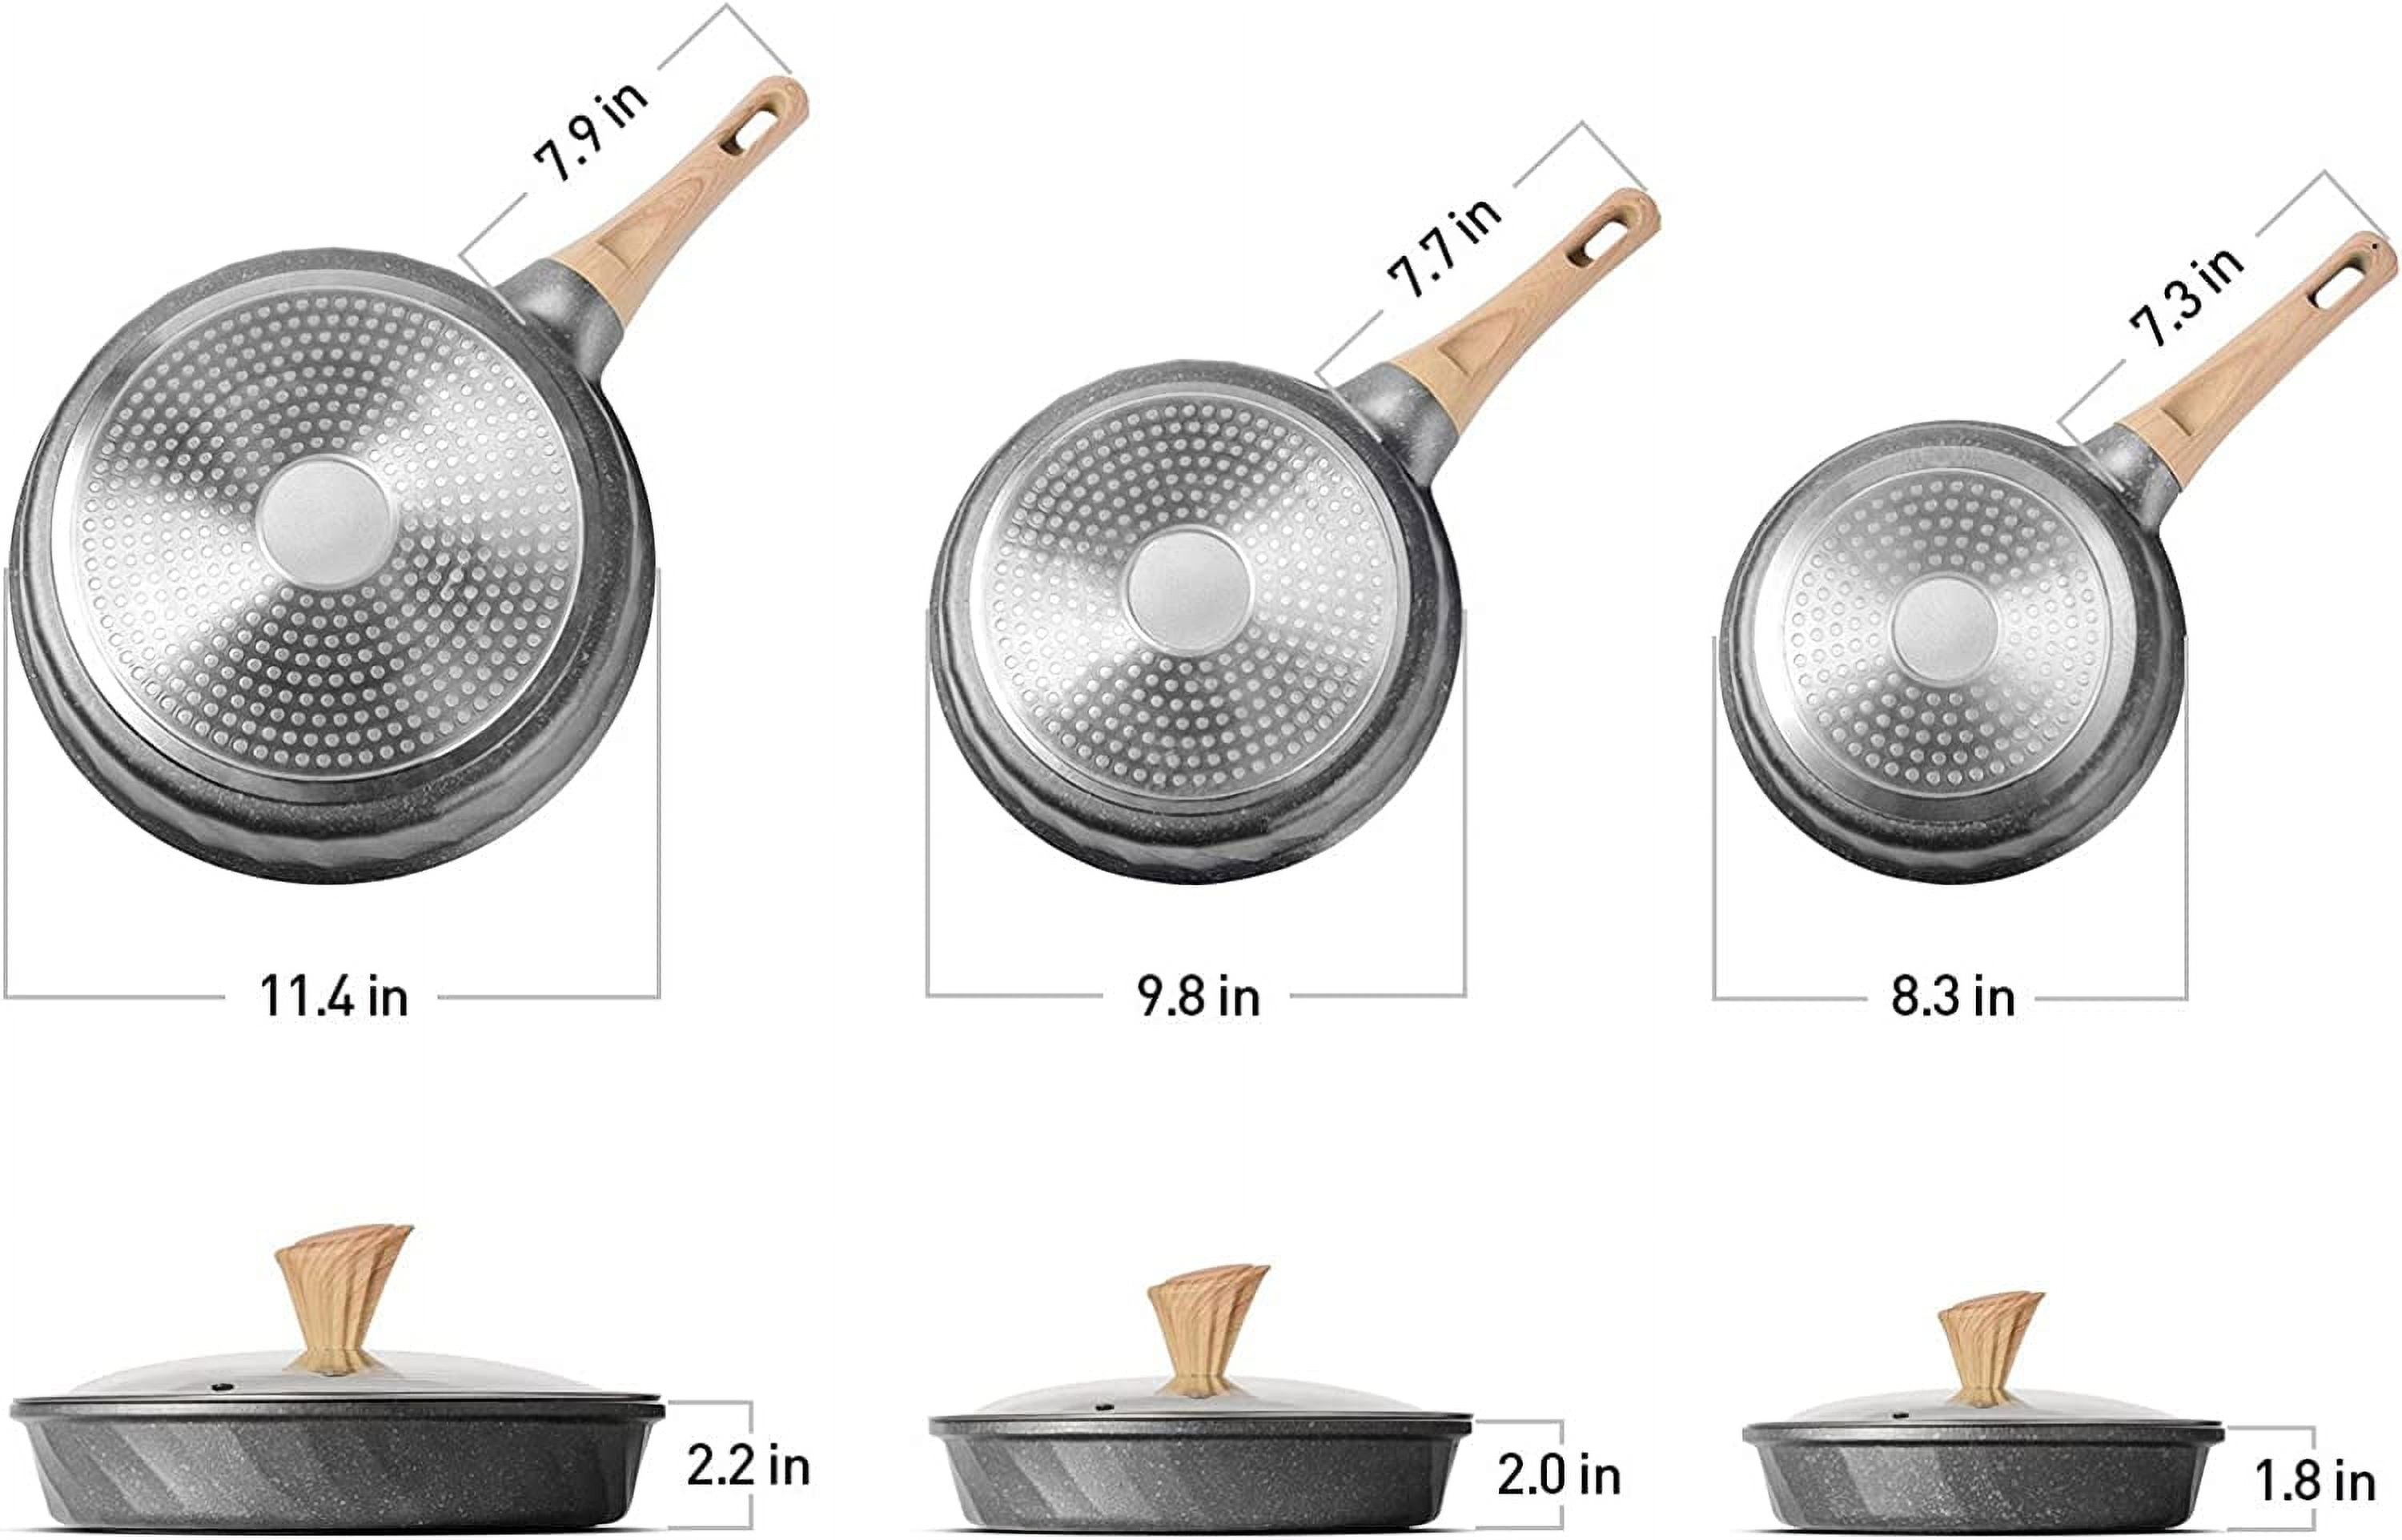  SODAY Pots and Pans Set Non Stick, 12 Pcs Kitchen Cookware Sets  Induction Cookware Granite Cooking Set with Frying Pans, Saucepans, Steamer  Silicone Shovel Spoon & Tongs (White) : Home 